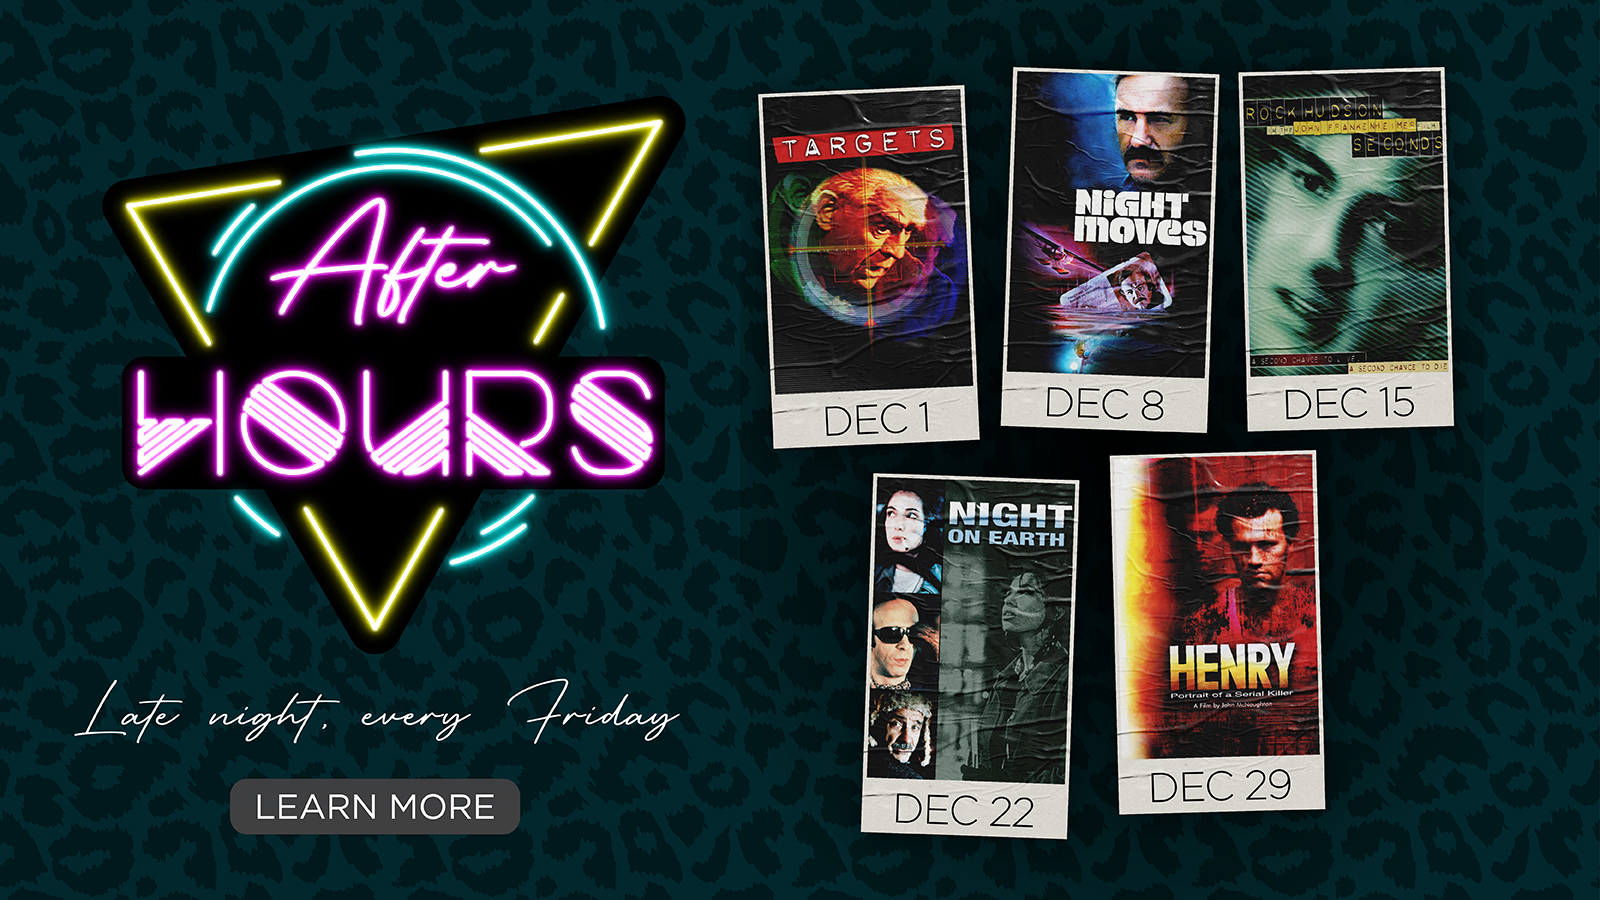 After Hours – Late Night Every Friday – Learn More